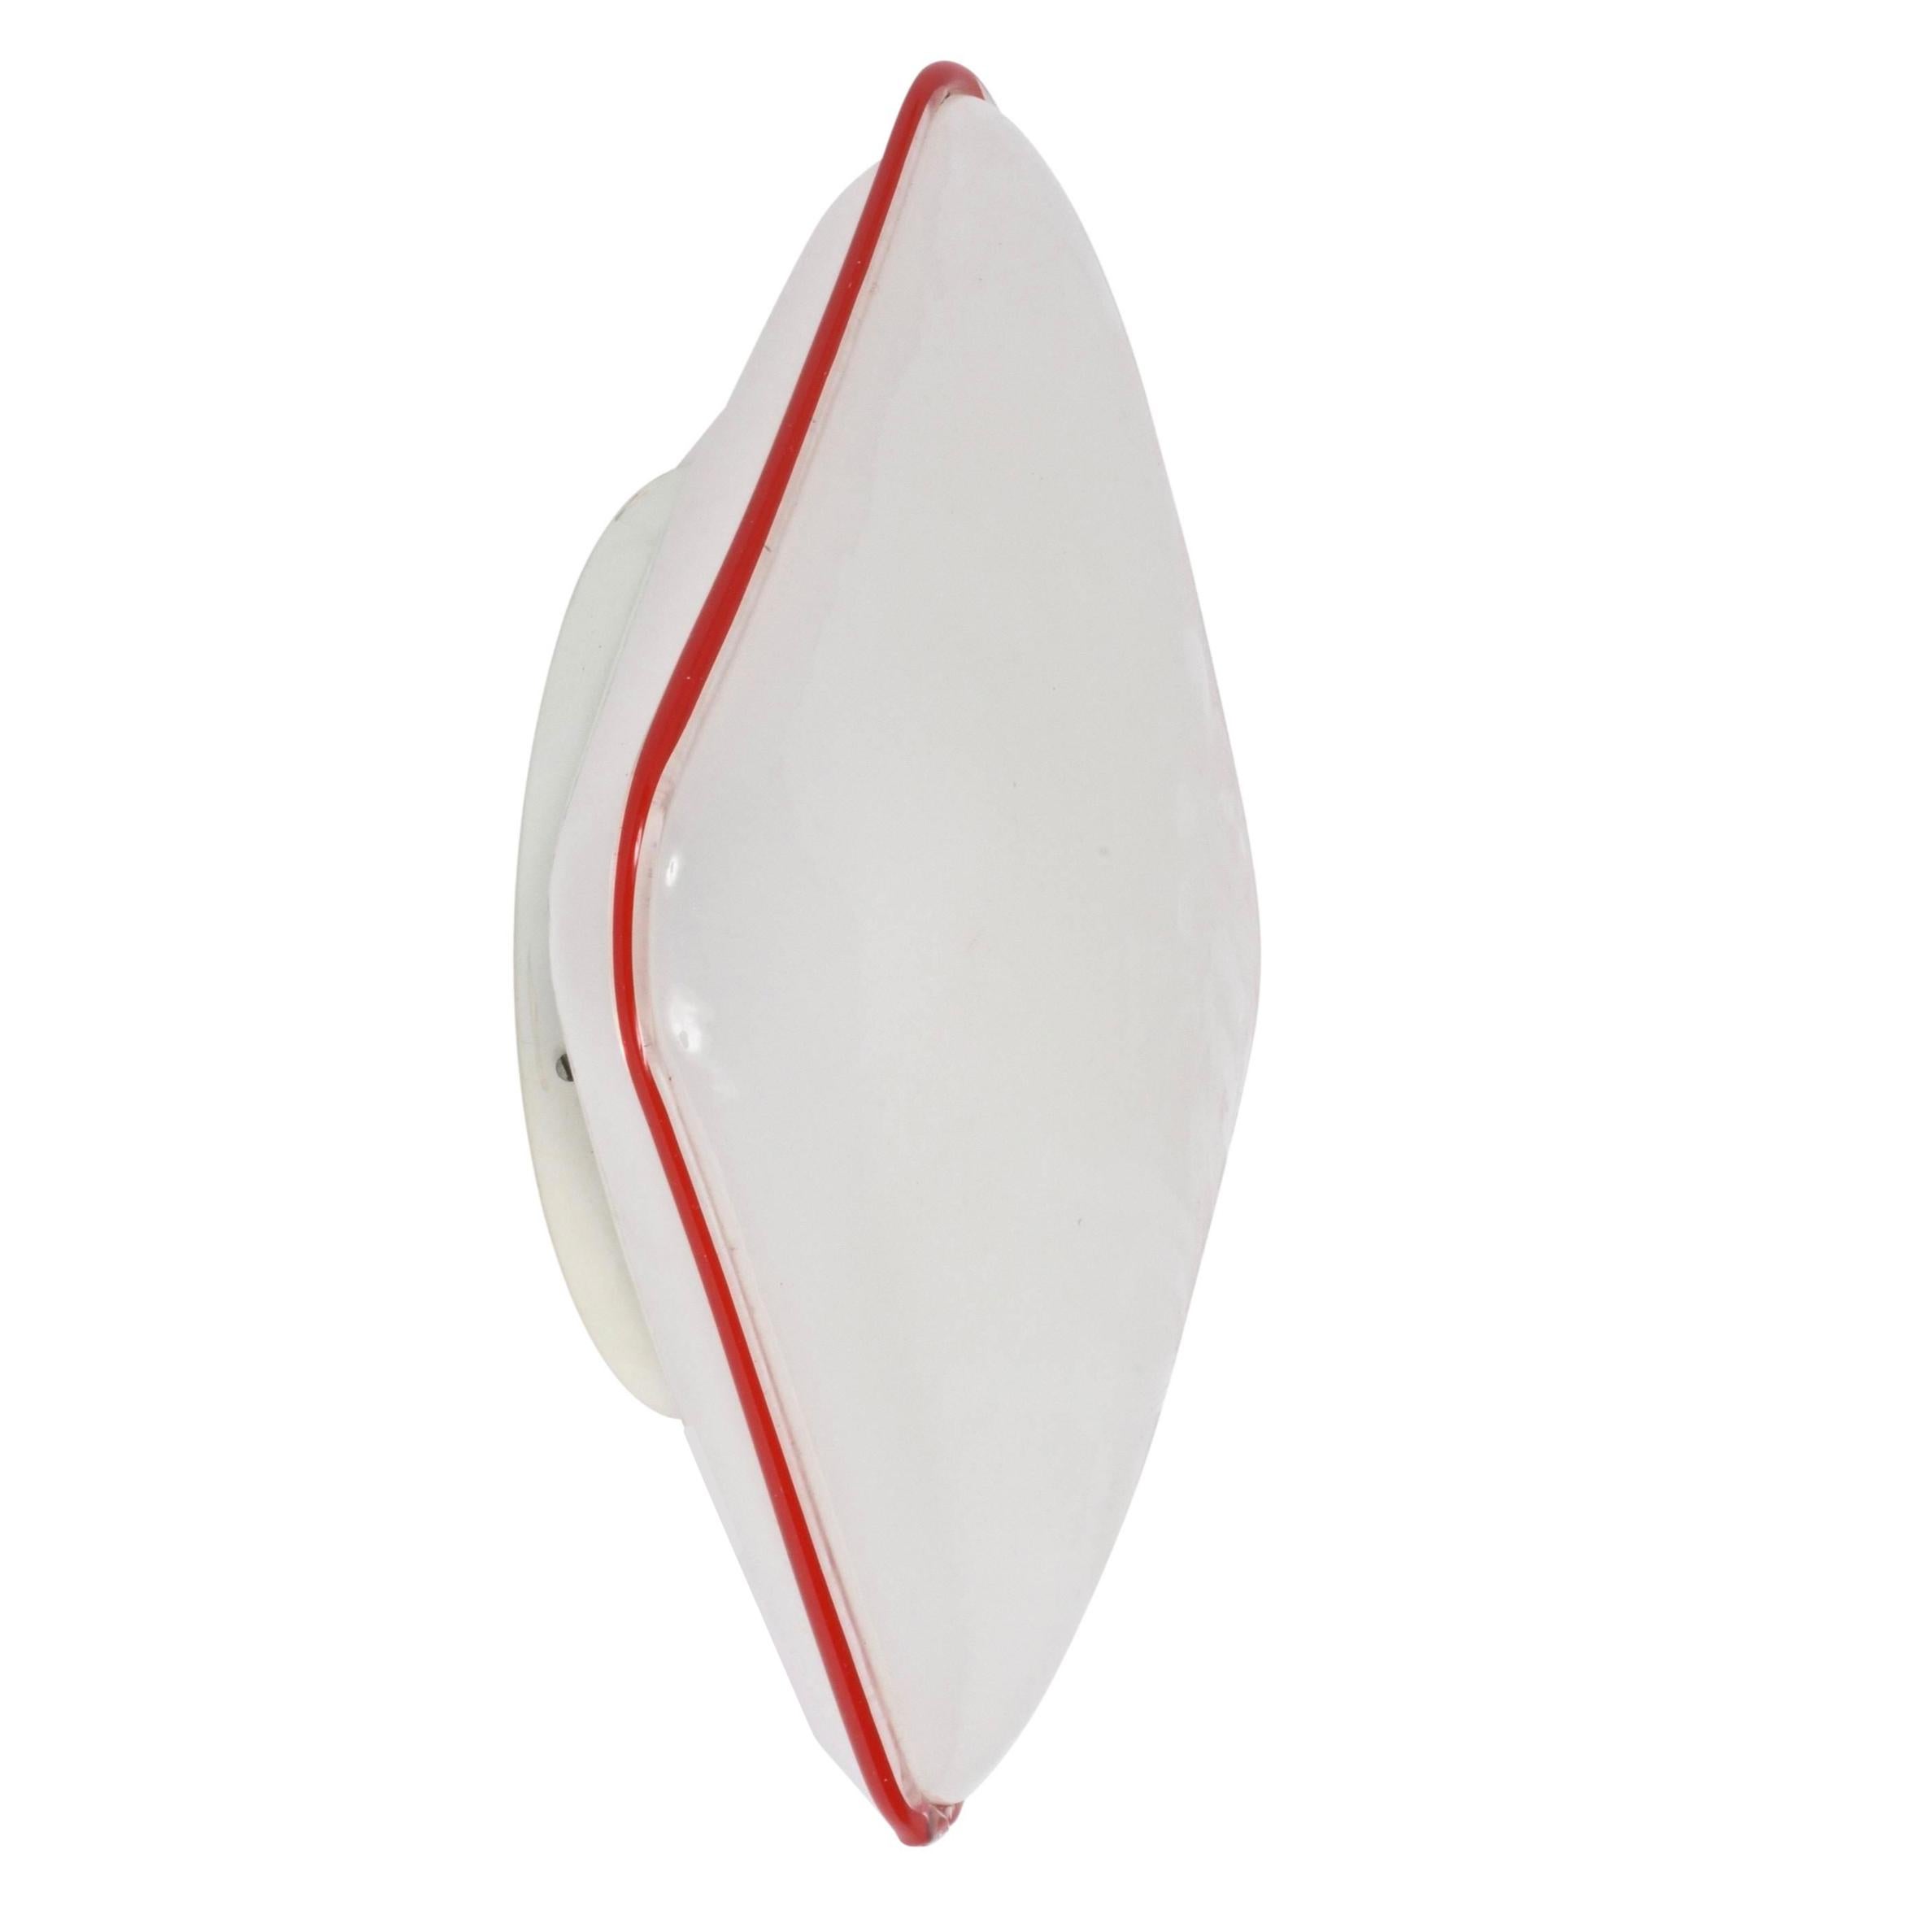 Rare ceiling light or sconce can be used also as a table lamp. It is an original Leucos Italian Lamp produced during the 1970s.

It is made of white Murano glass with an elegant red line and the glass diffuser has a slightly pyramidal form.

The